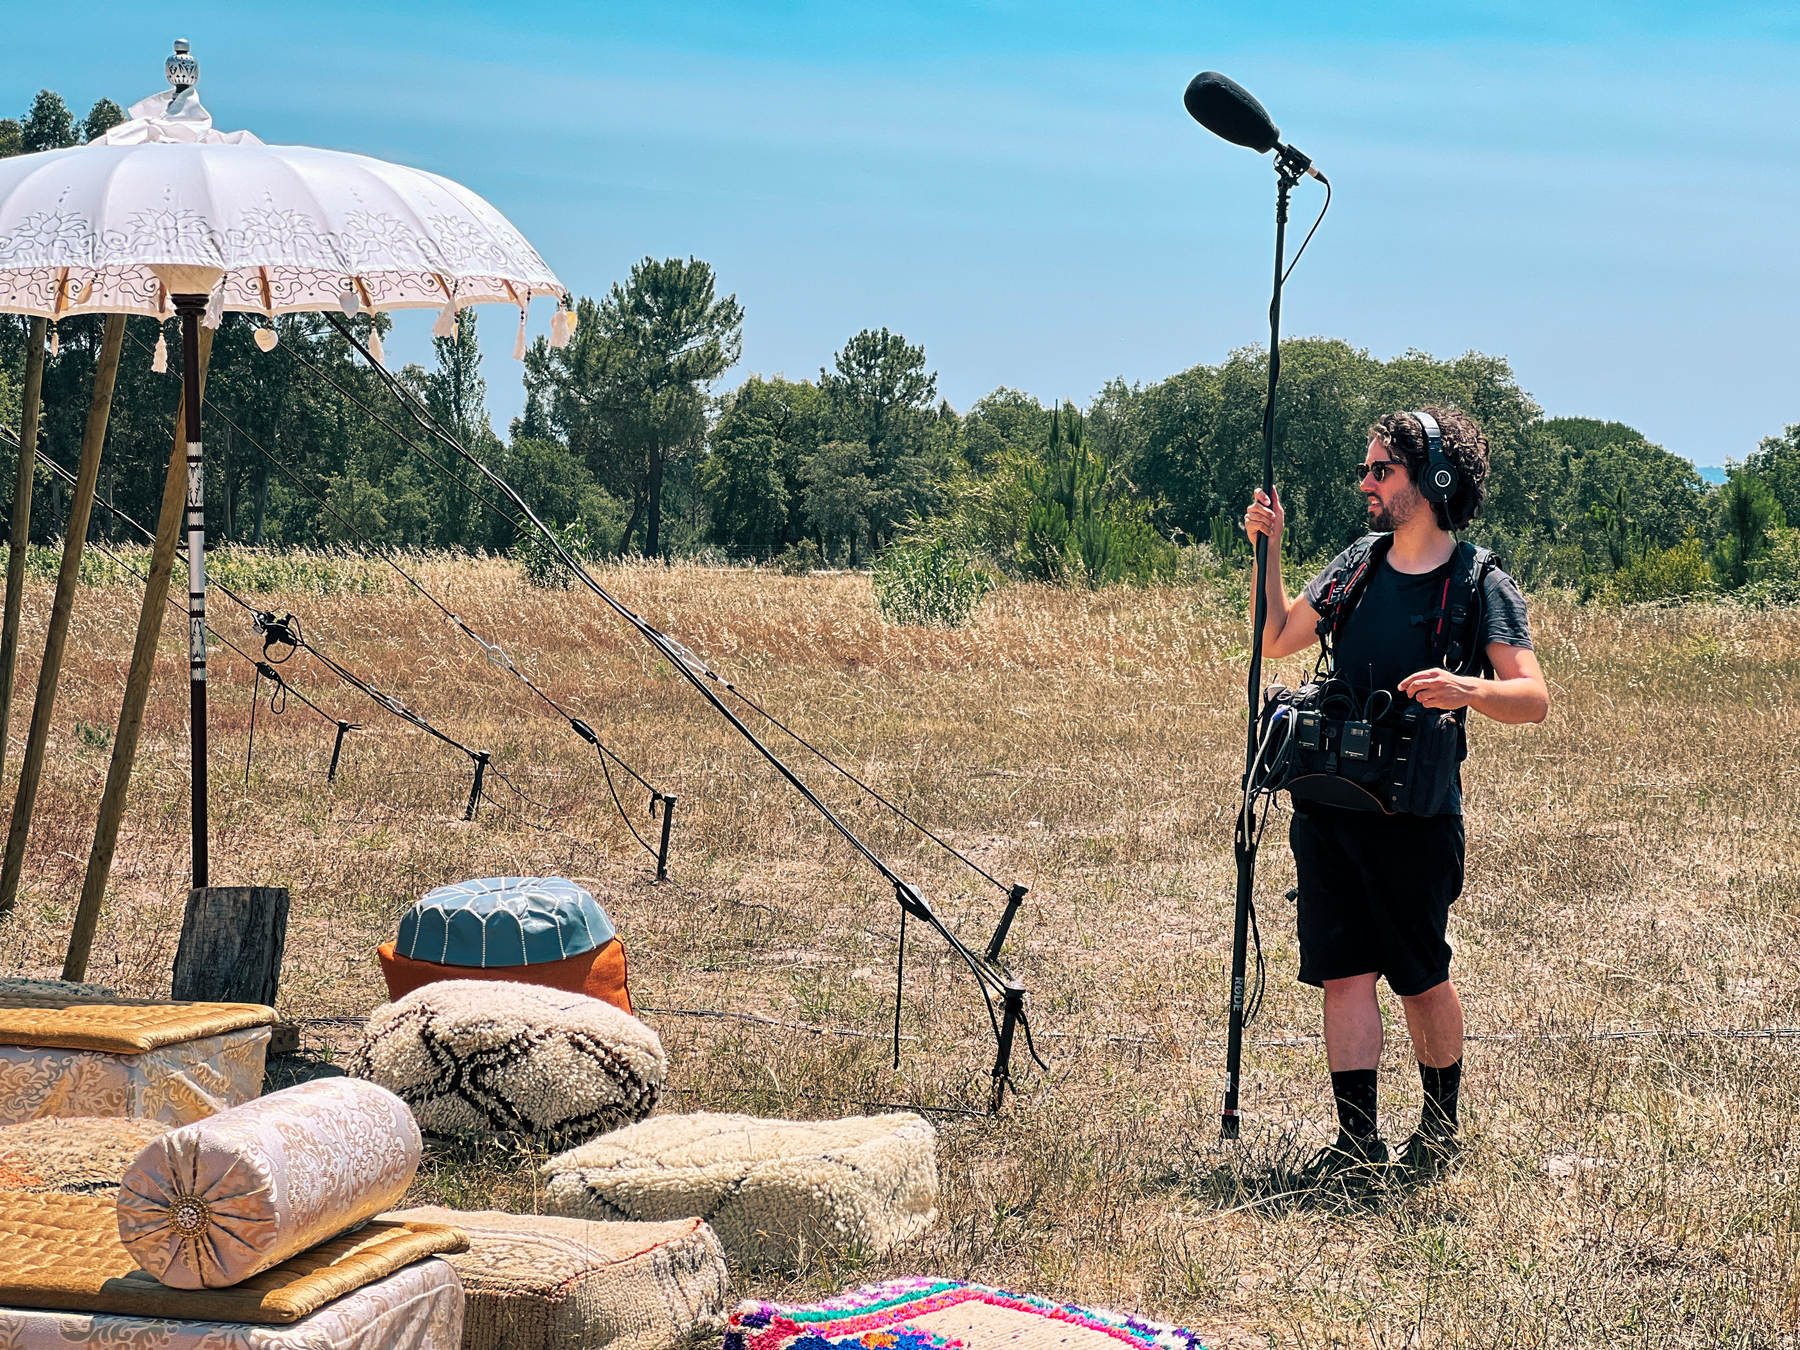 Boom operator, next to a tent. 